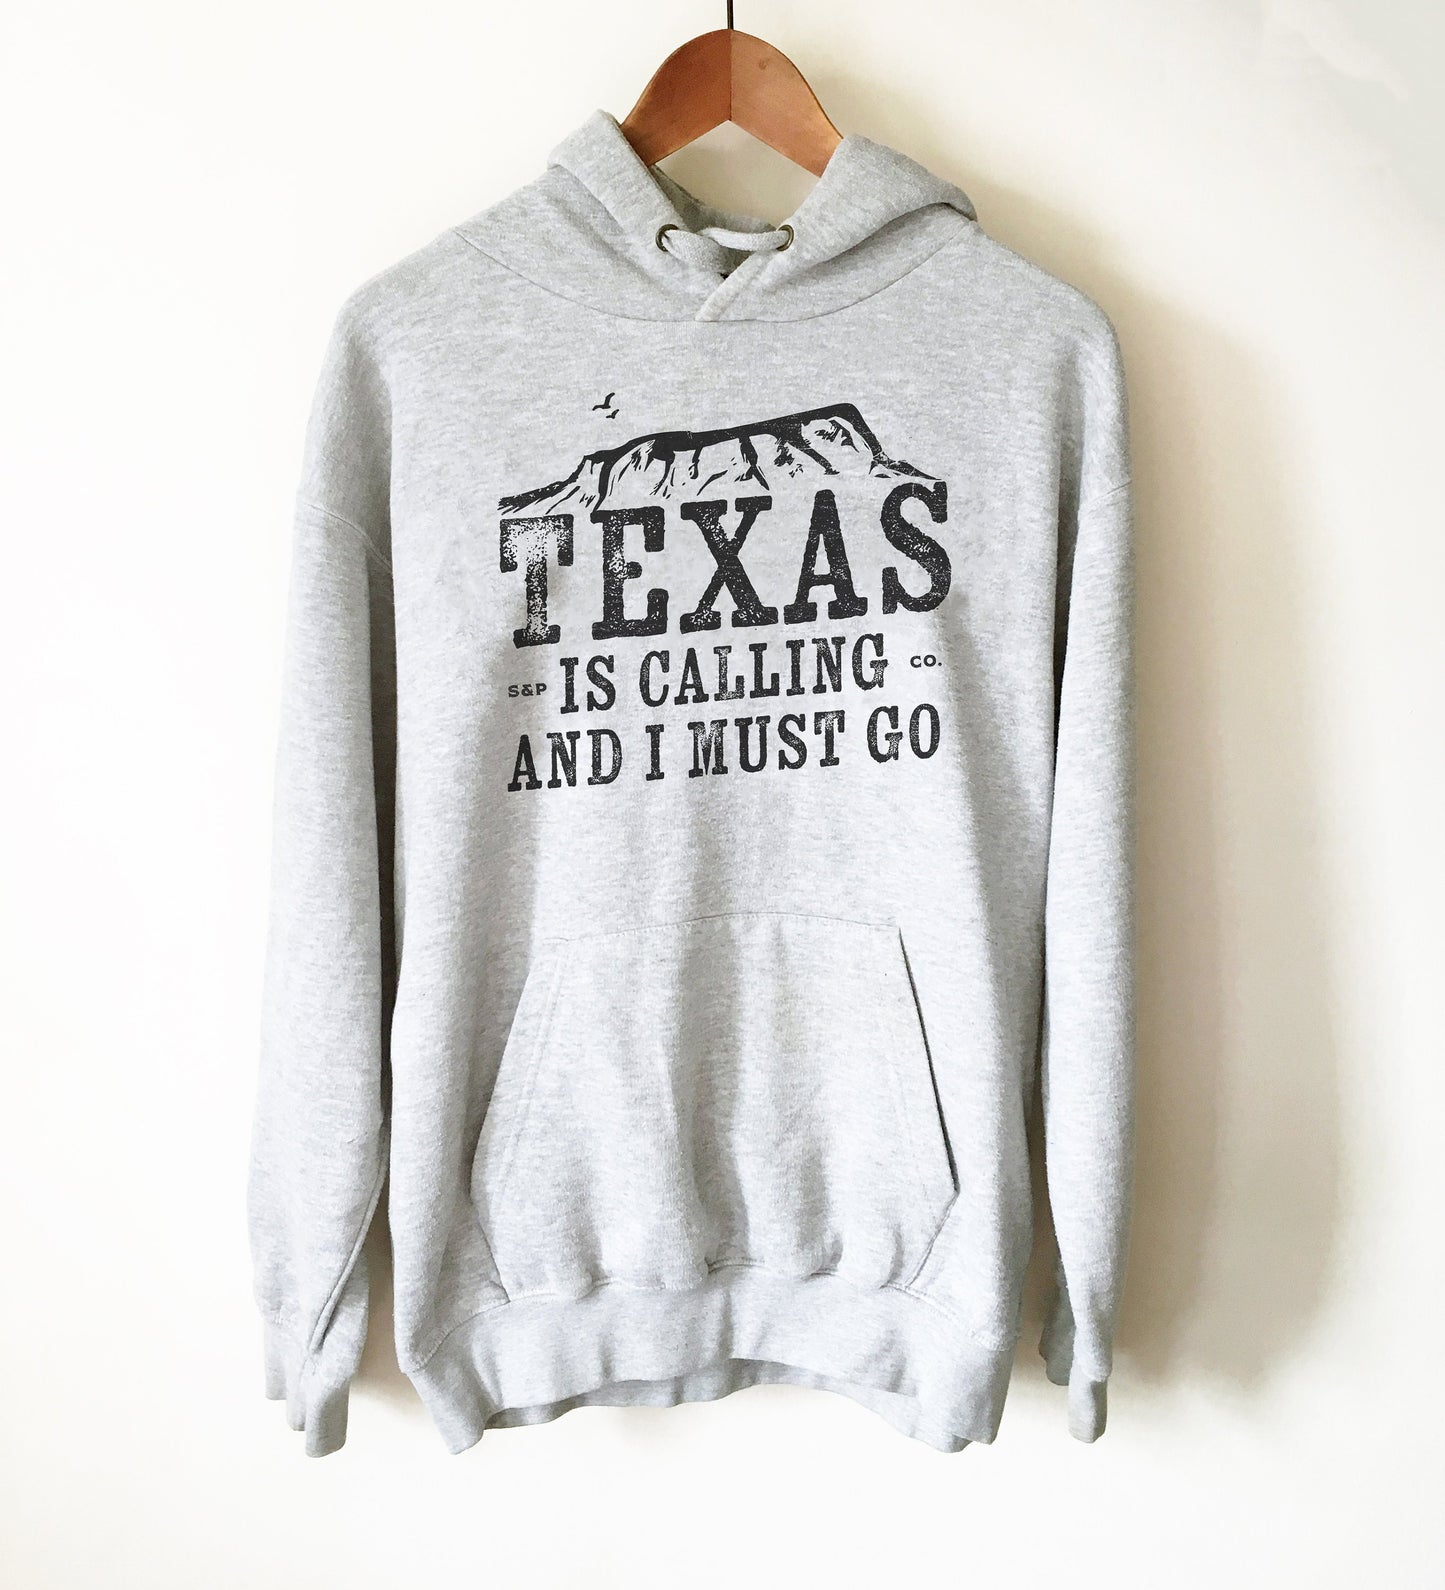 Texas Is Calling And I Must Go Hoodie - Texas Shirt, Texas Gift, Texas Pride, Texas Girl, Texas State Shirt, Southern Shirt